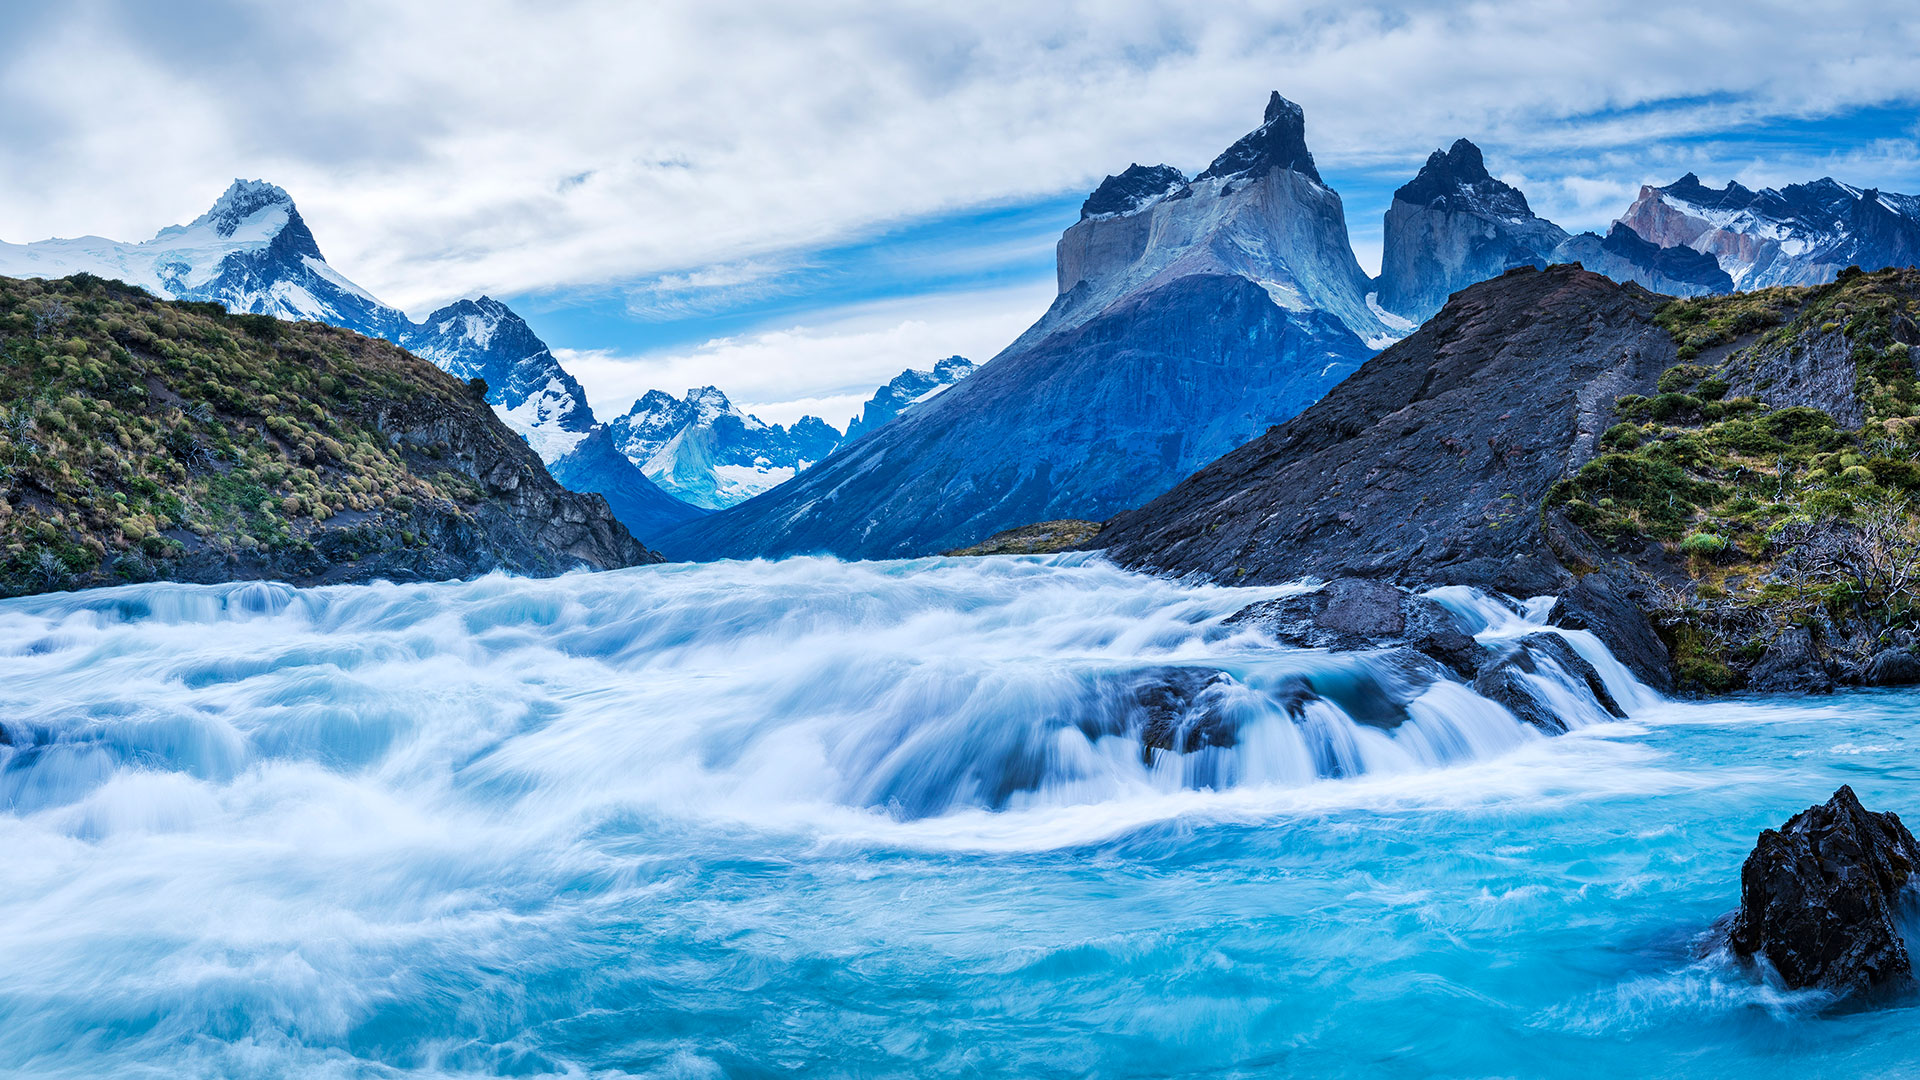 Salto Grande waterfall in Torres del Paine, Chile